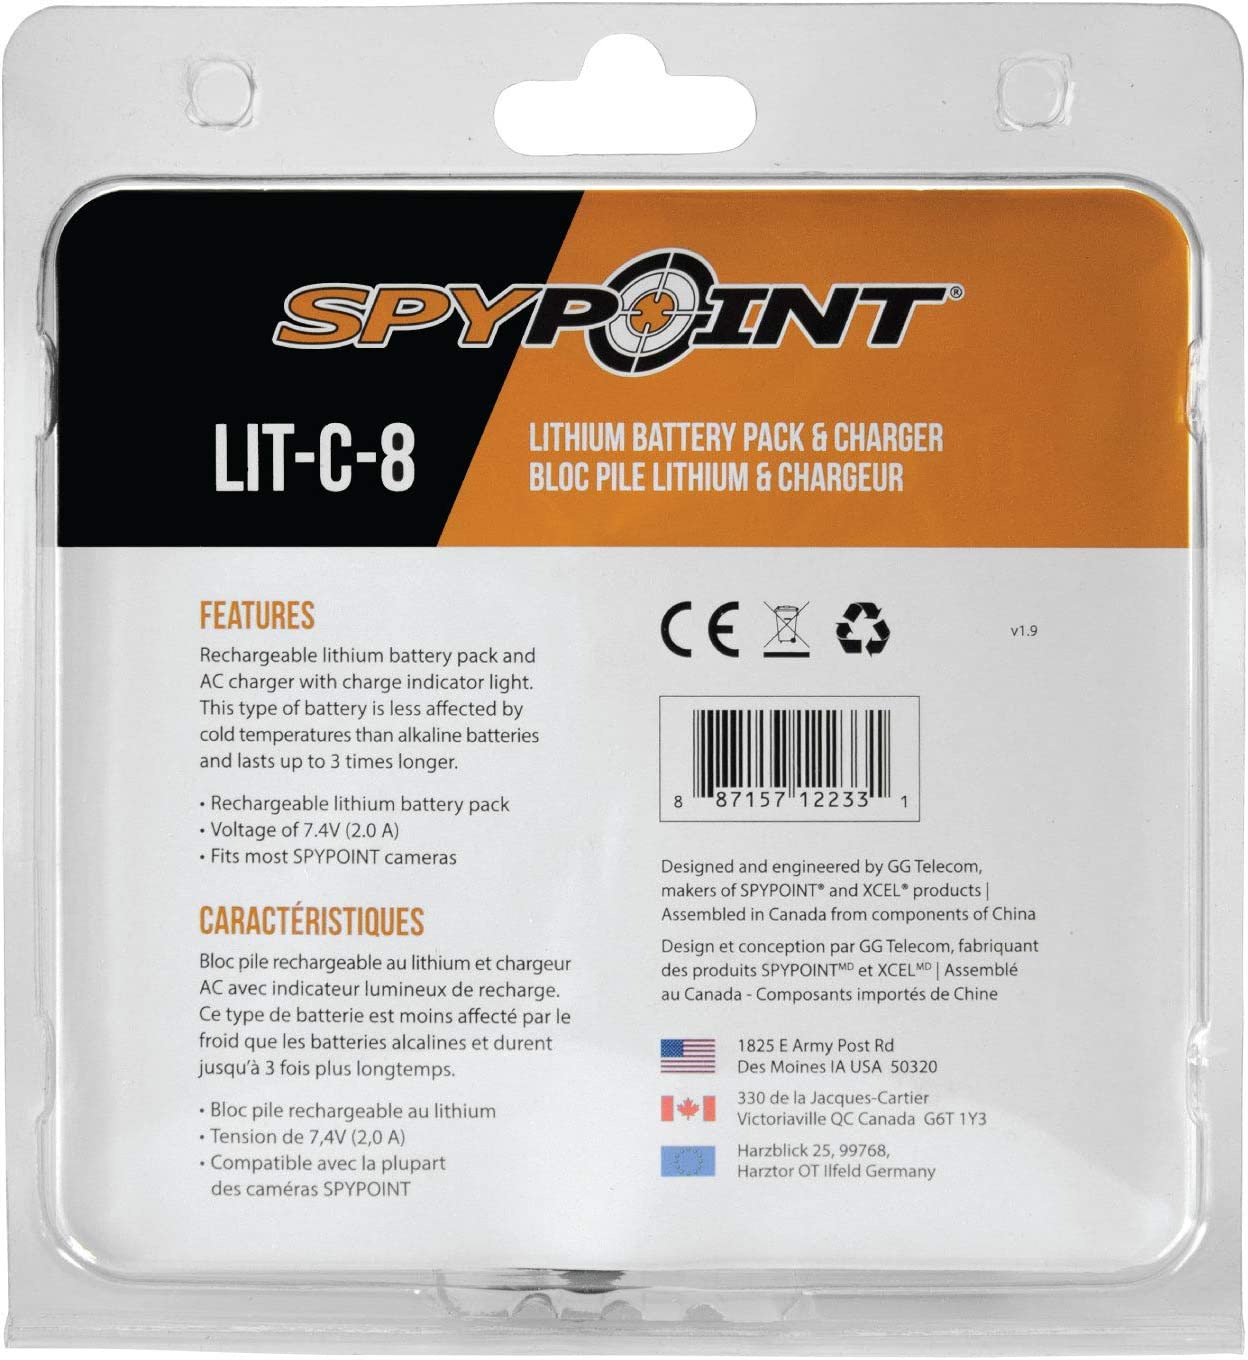 Spypoint 2000mAh Lithium Battery Pack and Charger